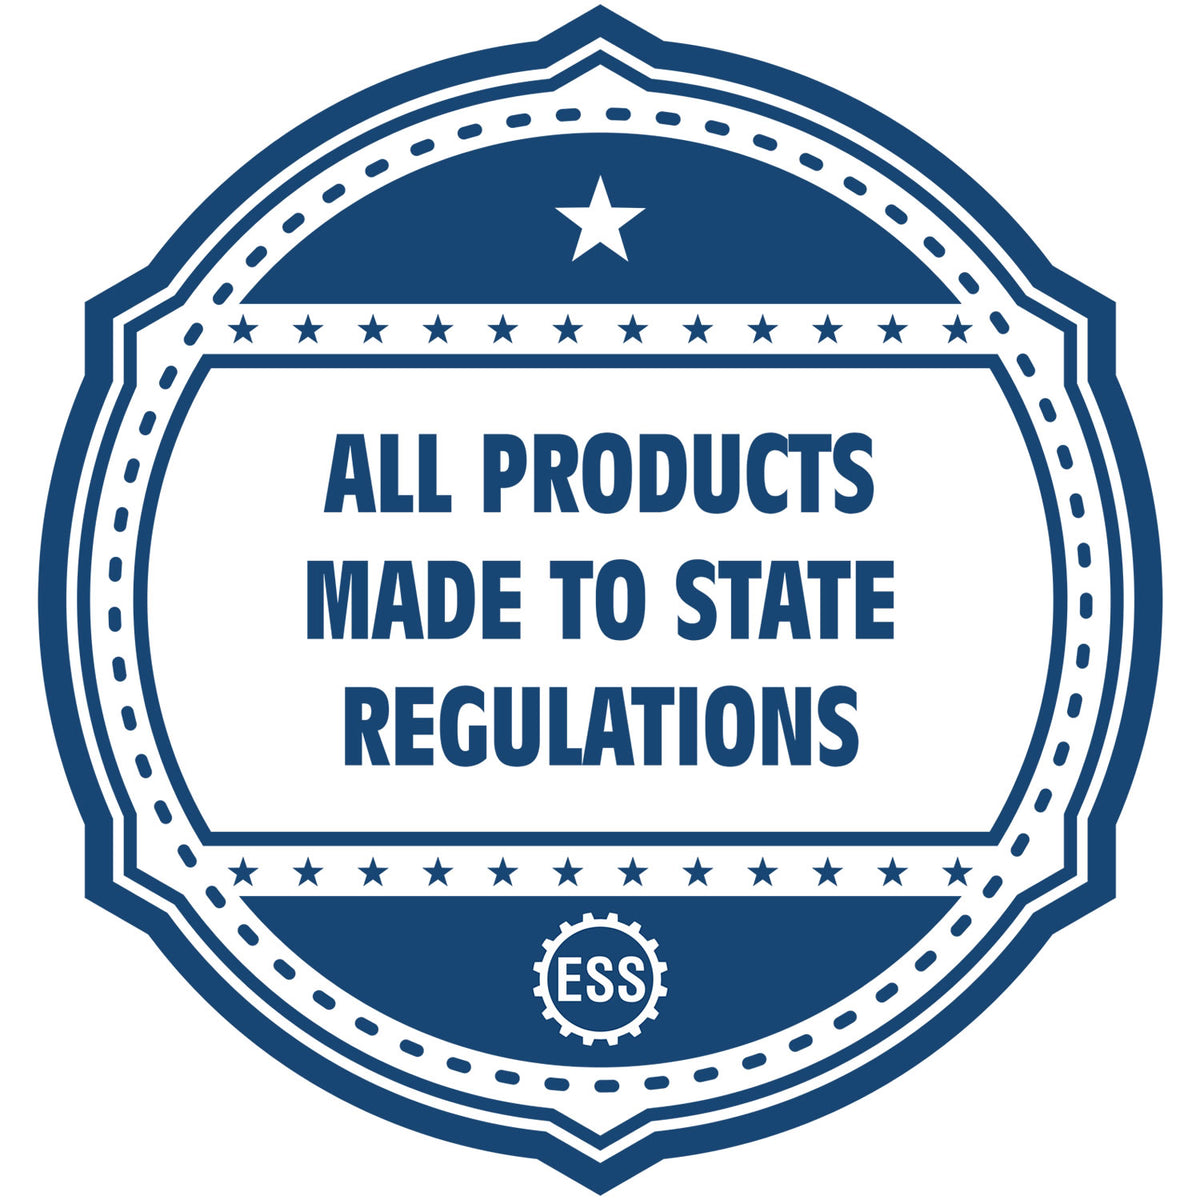 A blue icon or badge for the Slim Pre-Inked Massachusetts Professional Geologist Seal Stamp showing that this product is made in compliance with state regulations.